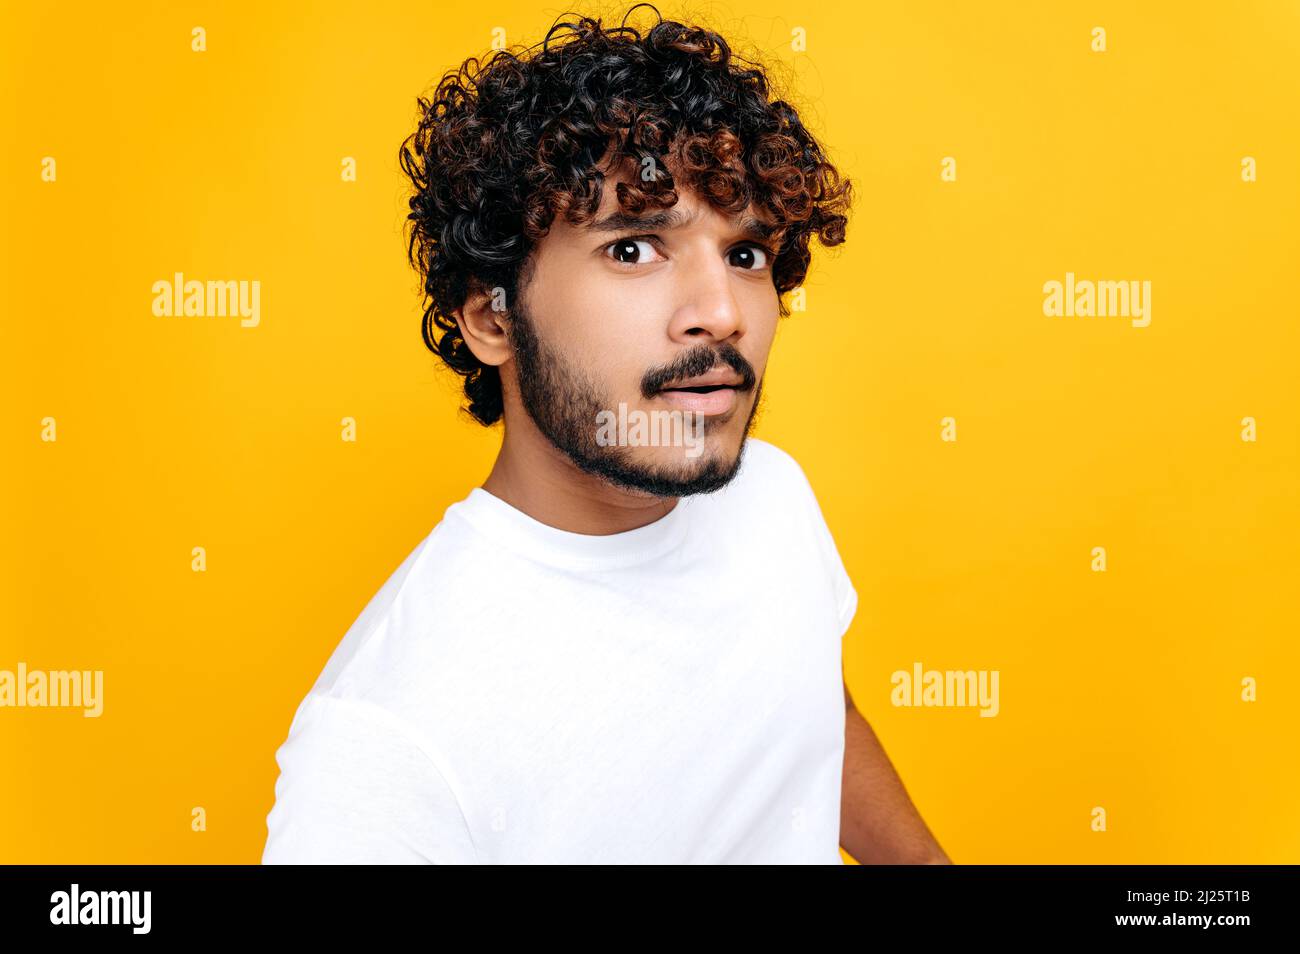 Close up of confused puzzled curly haired indian or arabian guy in white t-shirt, looking questioningly at the camera, while standing over isolated orange background Stock Photo